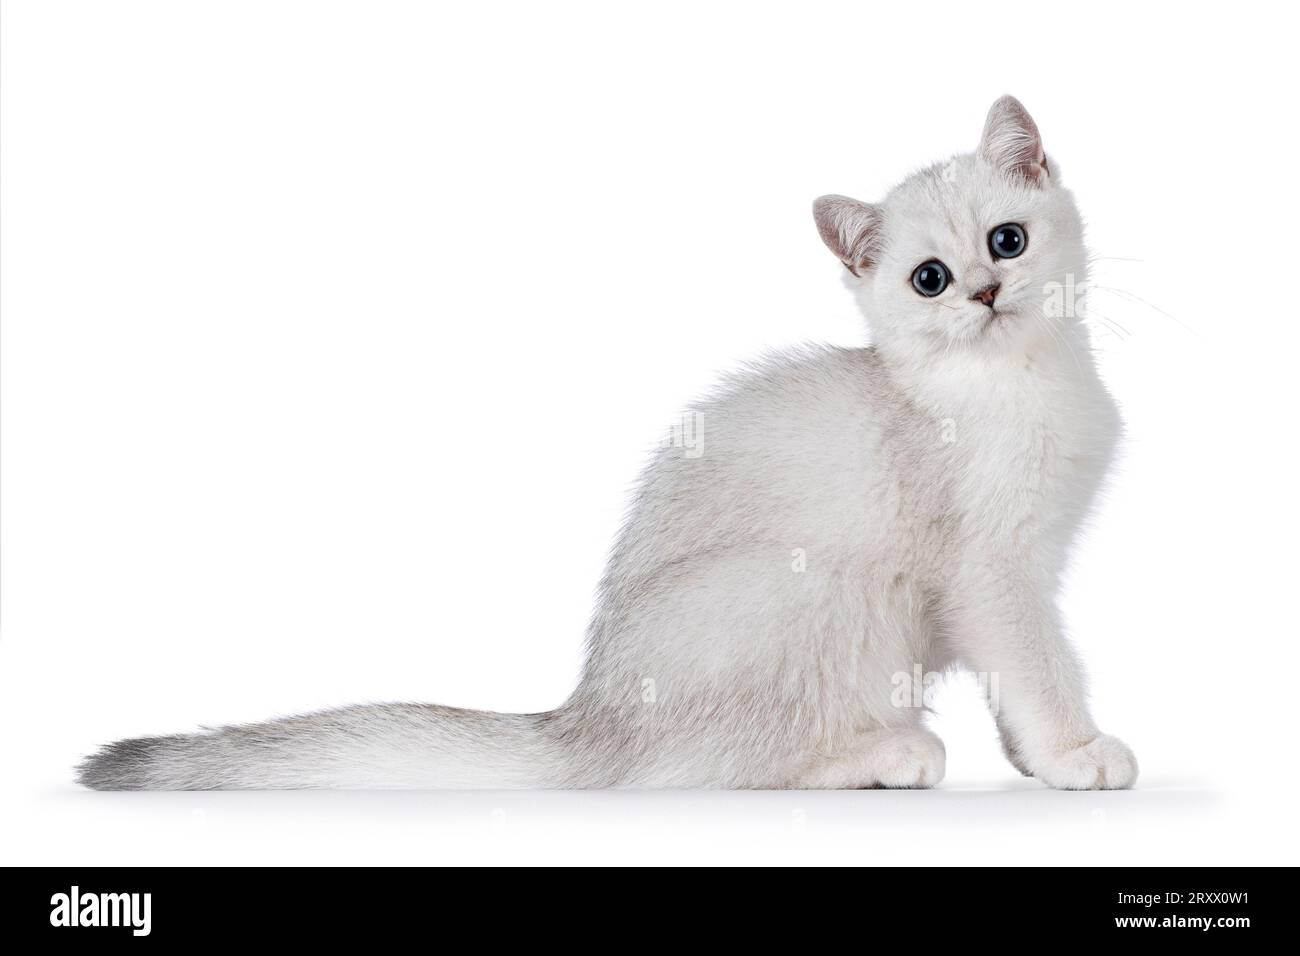 Adorable silver shaded British Shorthair cat kitten, sitting up side ways. Looking towards camera. Isolated on a white background. Stock Photo